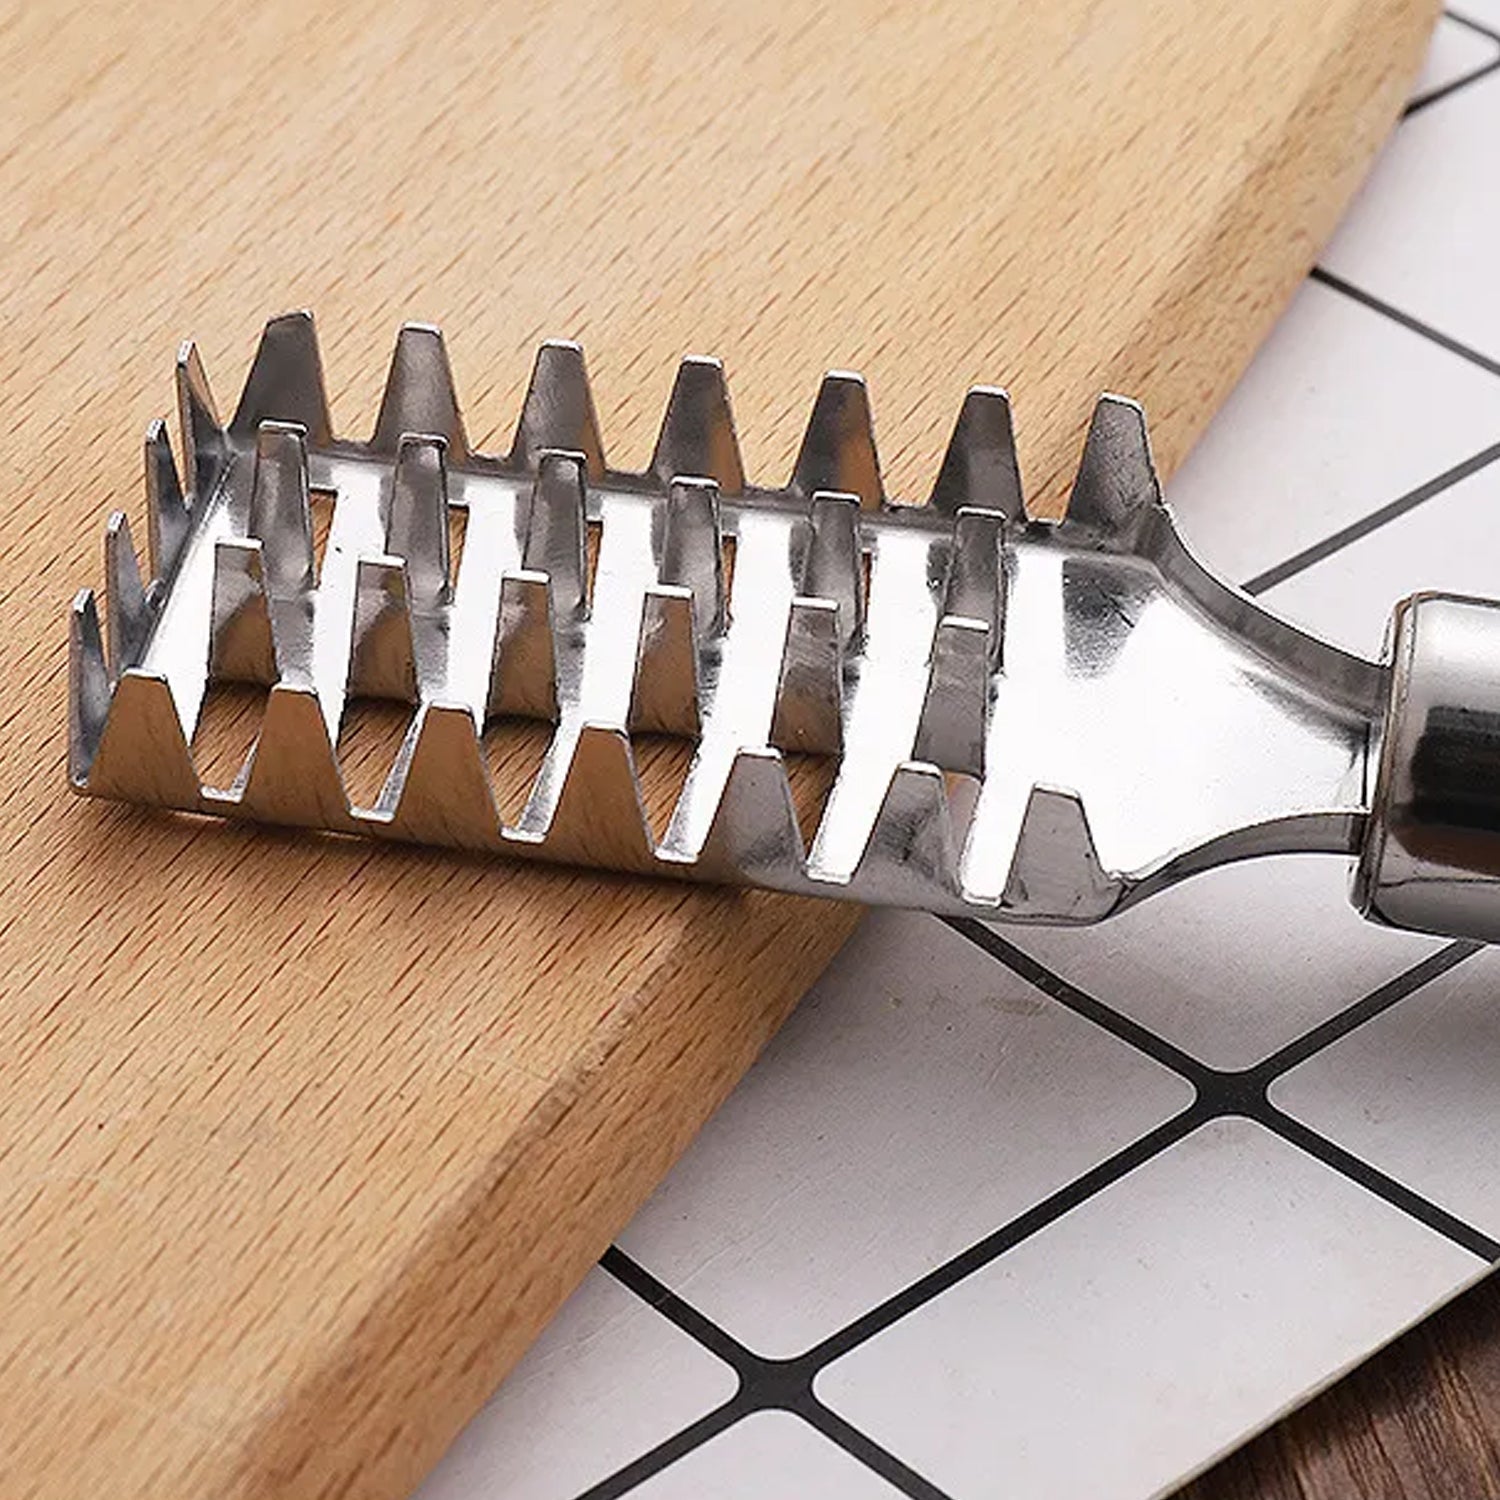 2194 Fish Scale Remover Scraper Stainless Steel Fish Cutting Tools Sawtooth Easily Remove Fish Scales-Cleaning Brush Scraper Kitchen Tool- DeoDap